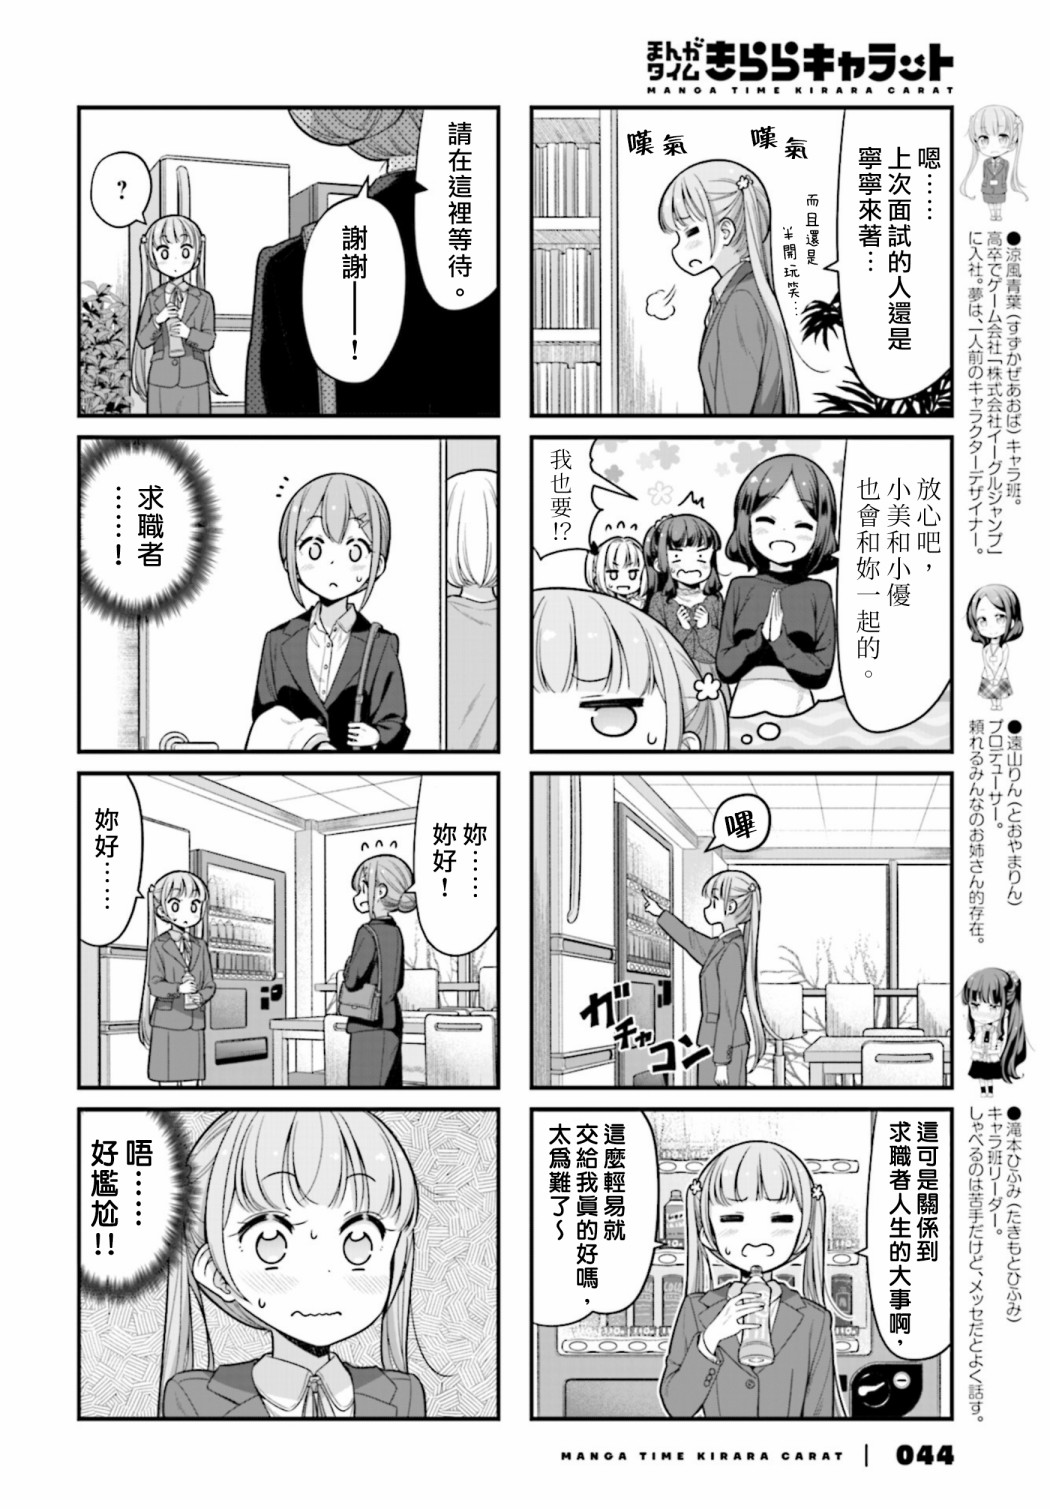 NEW GAME! - 133 第133話 - 2